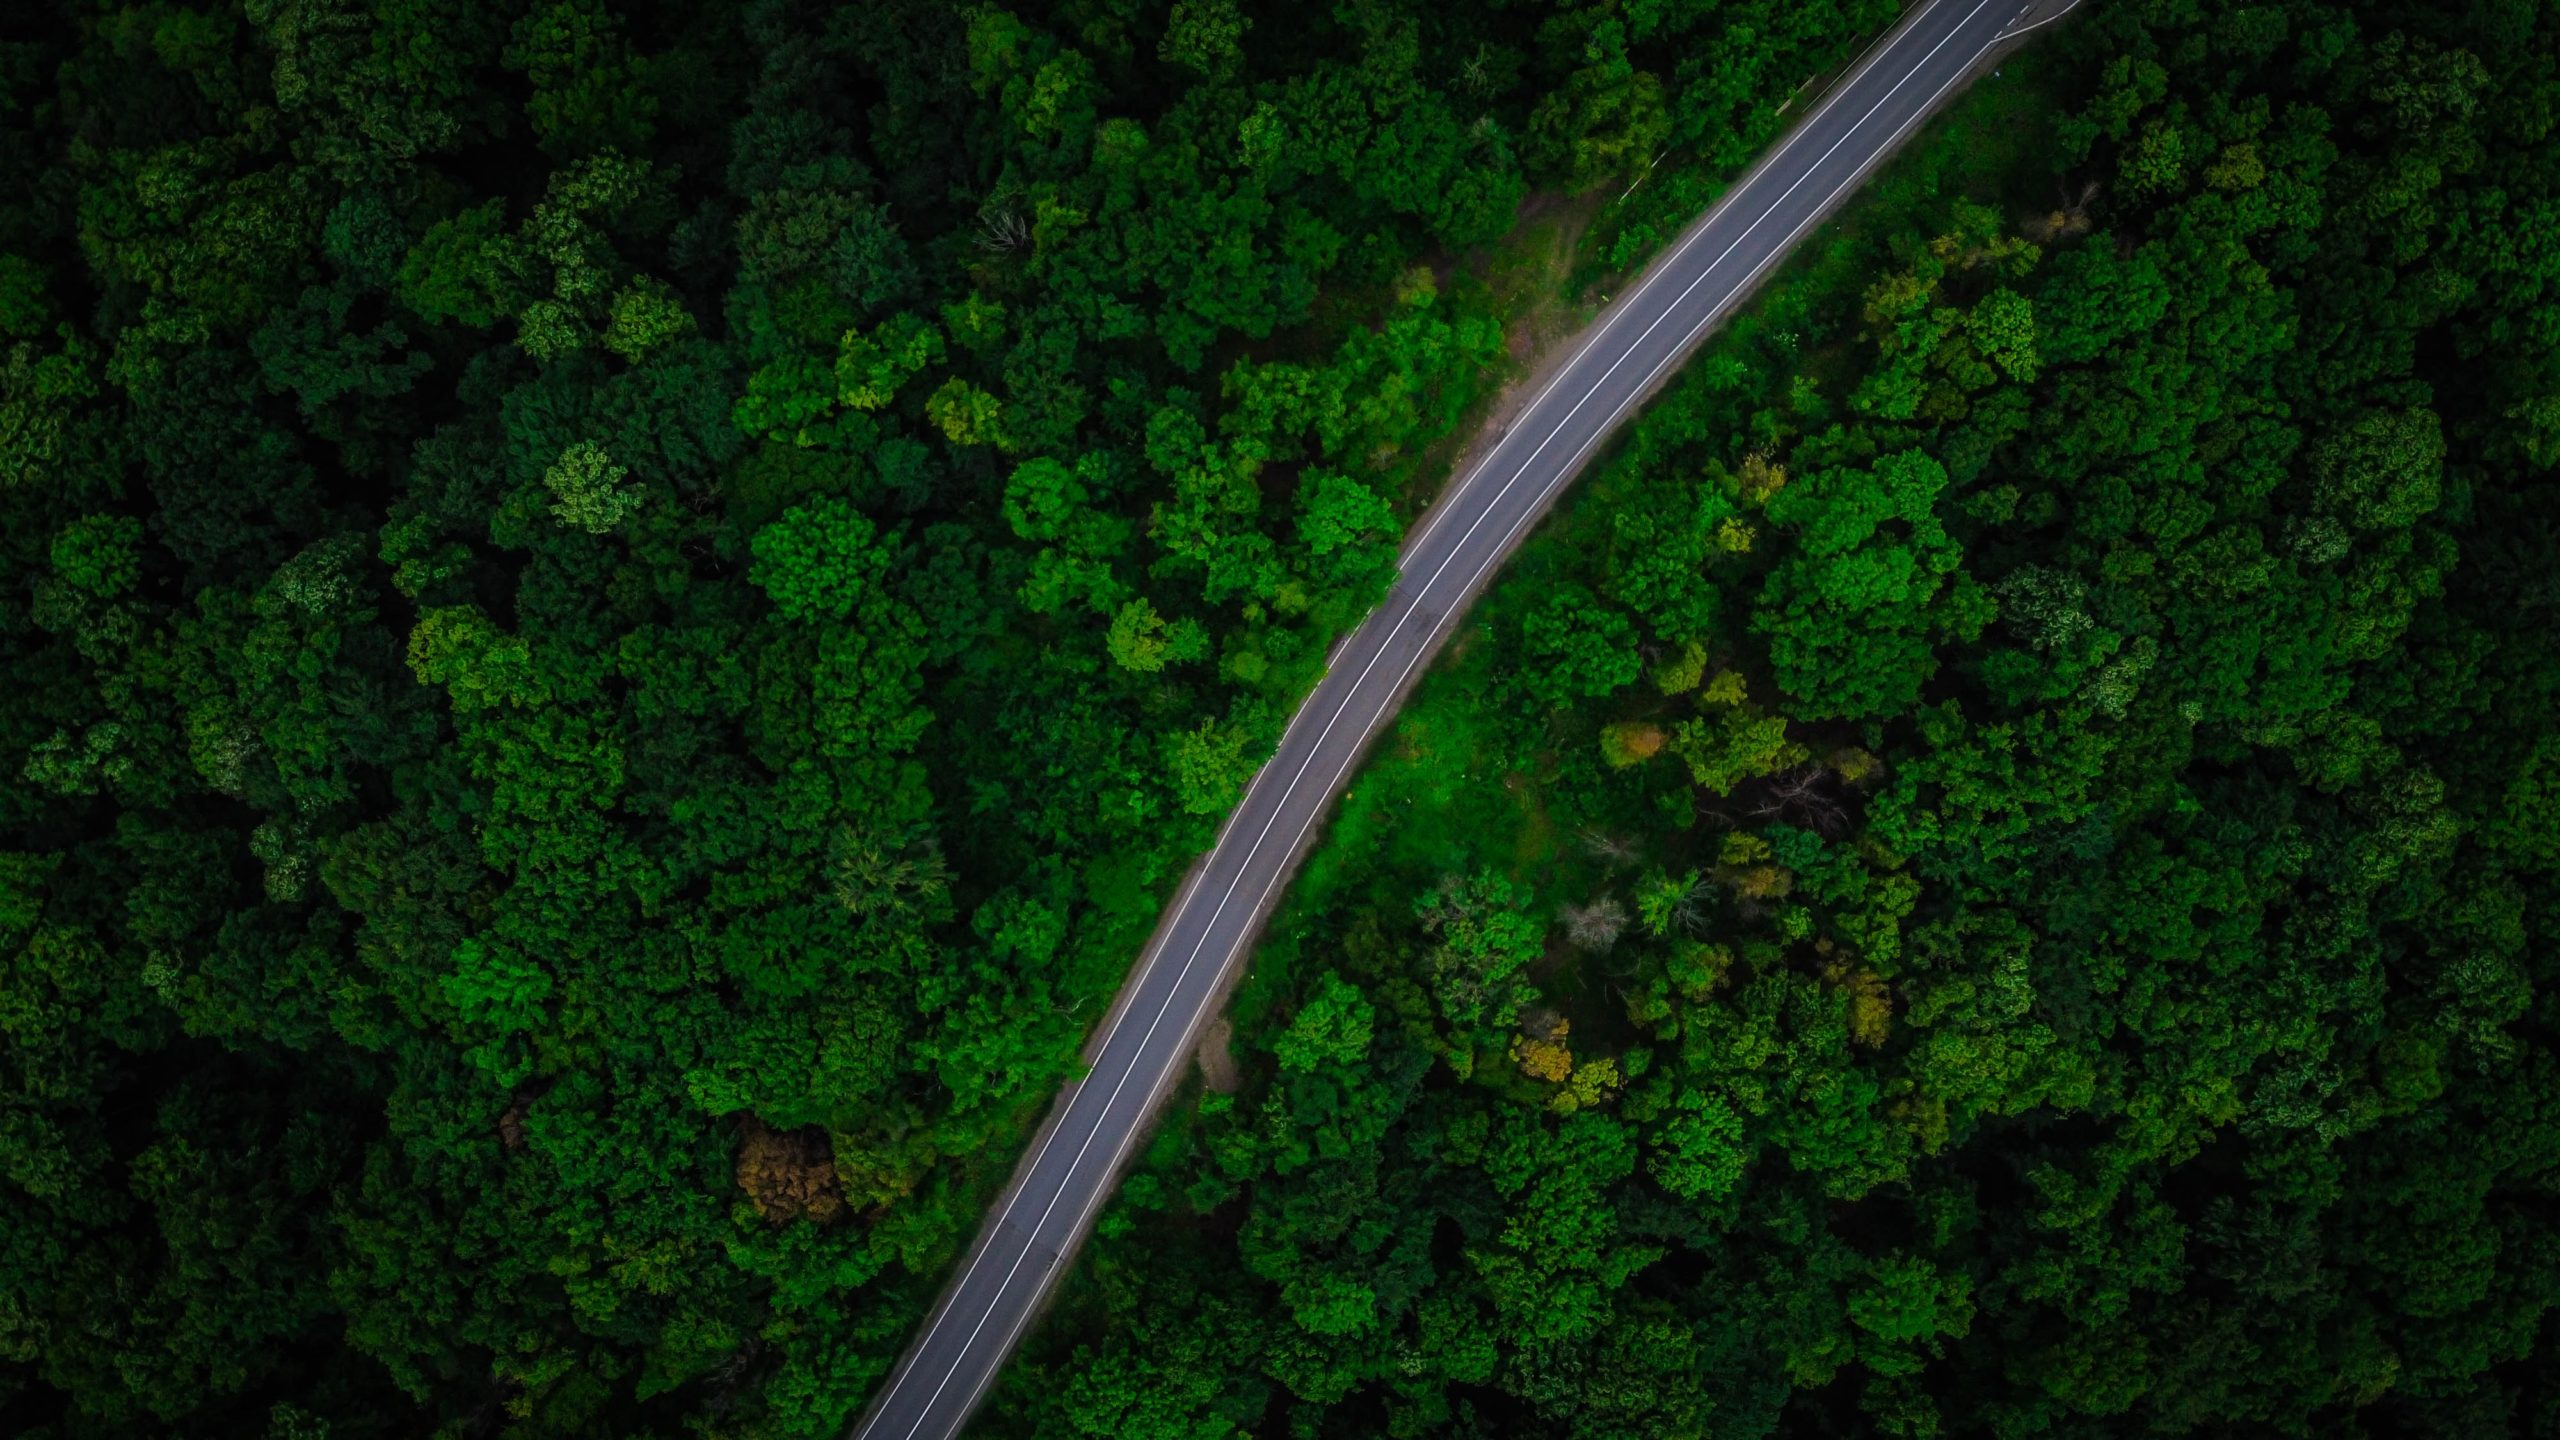 Aerial view of a green forest with a highway cutting diagonally through it.